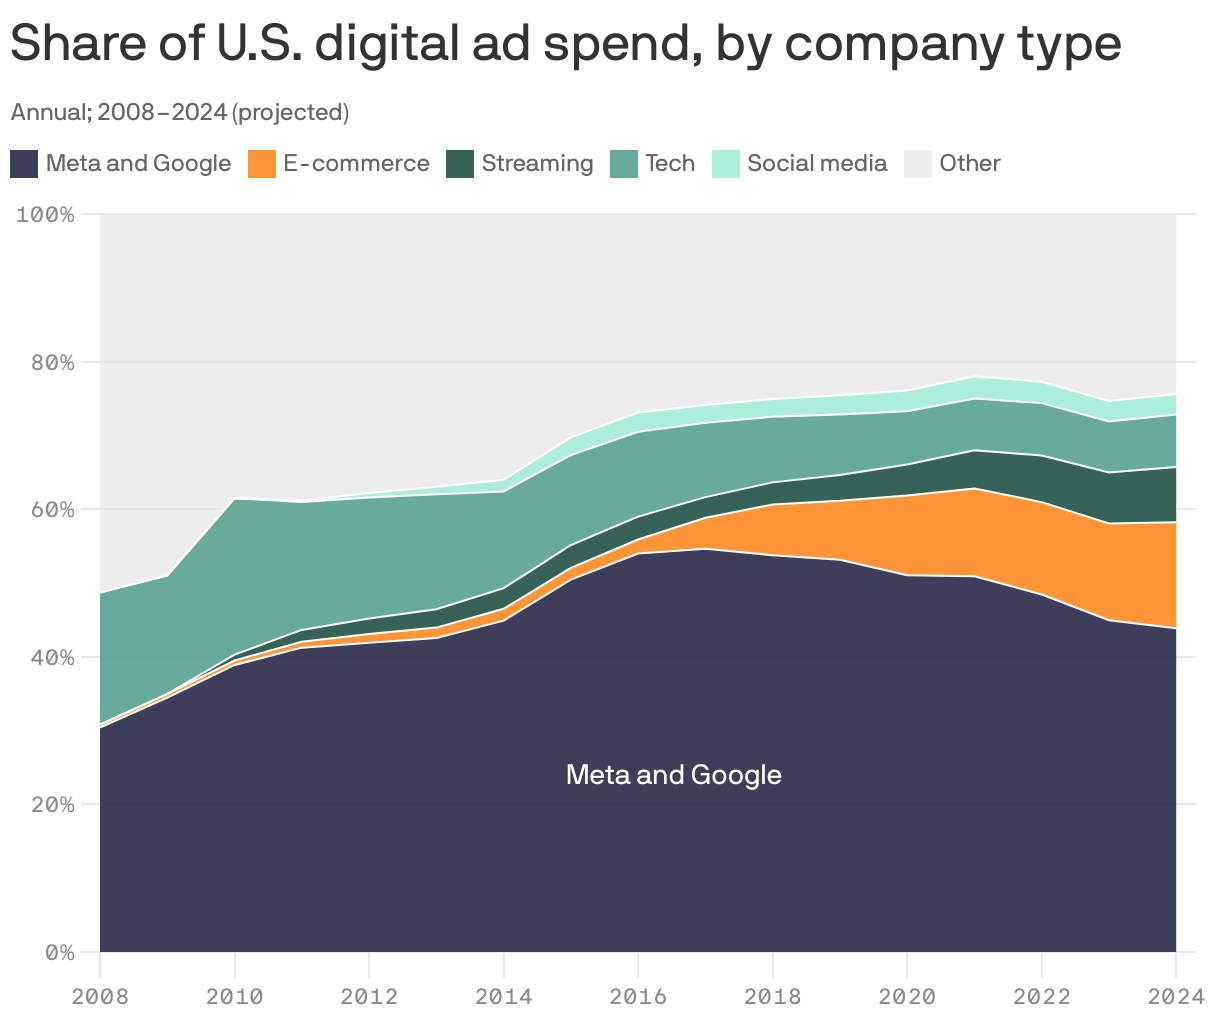 U.S. digital ad spending share, by company type